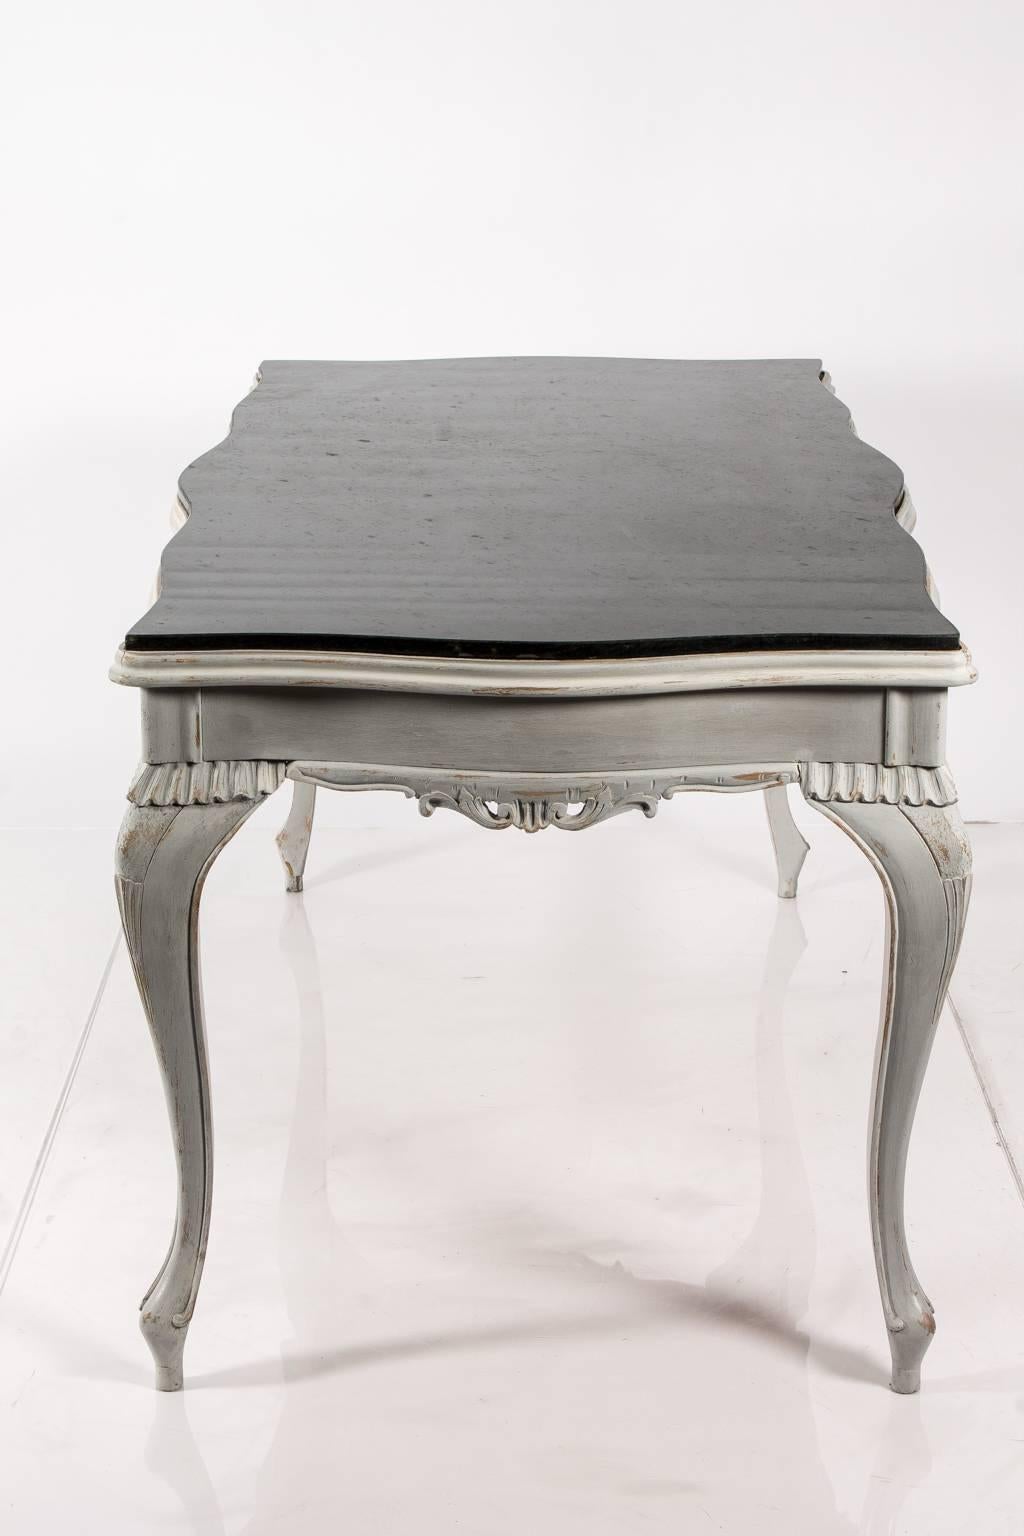 Painted table with cabriole legs and a marble top. Note, this marble is not original to the table. The dealer found the marble piece so as you can see in the images, it does not sit flush.